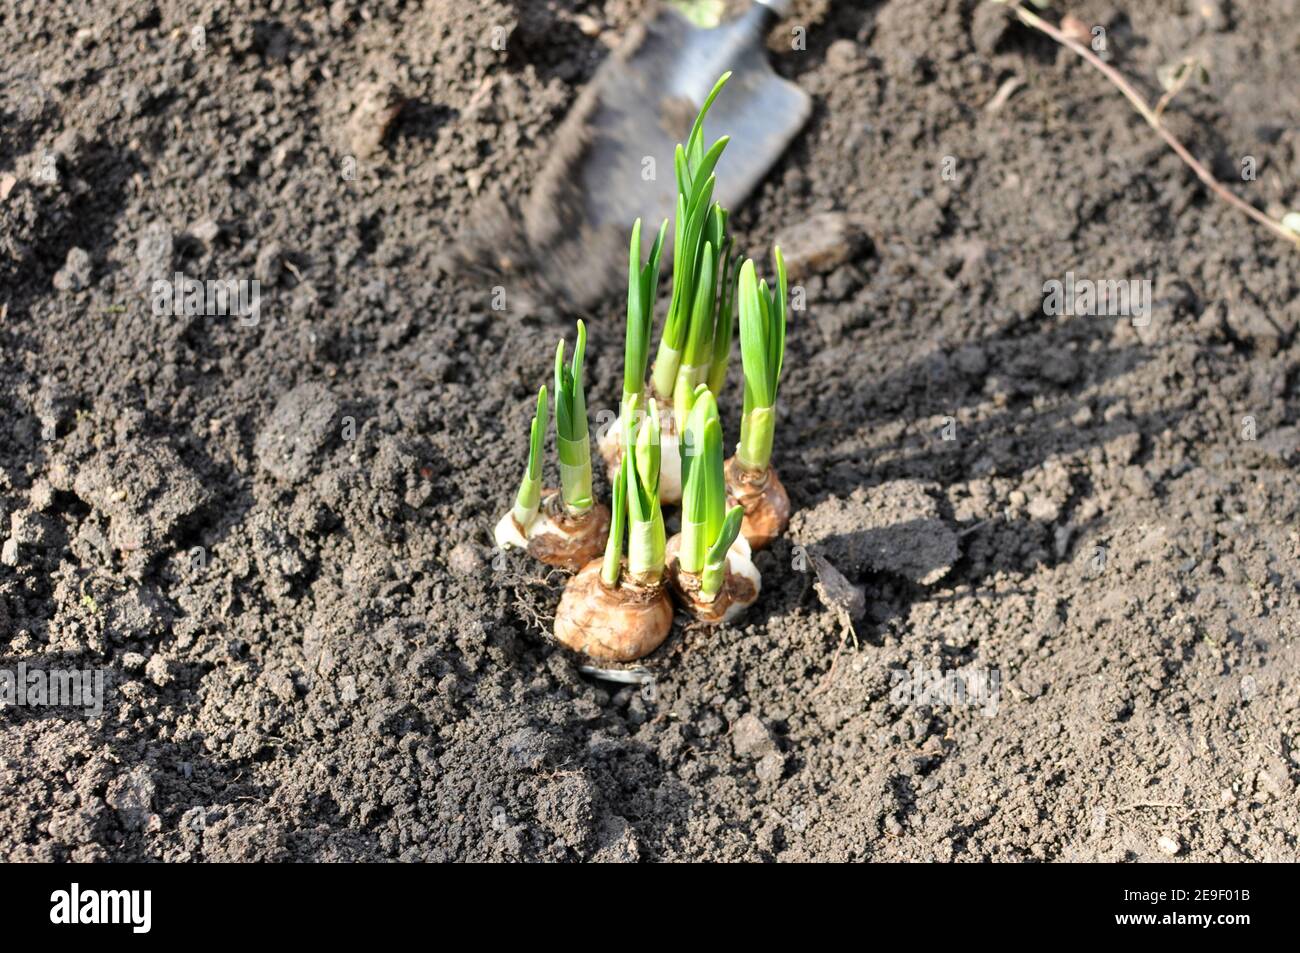 Top view of flower bulbs of daffodil young plant in the garden soil. Stock Photo